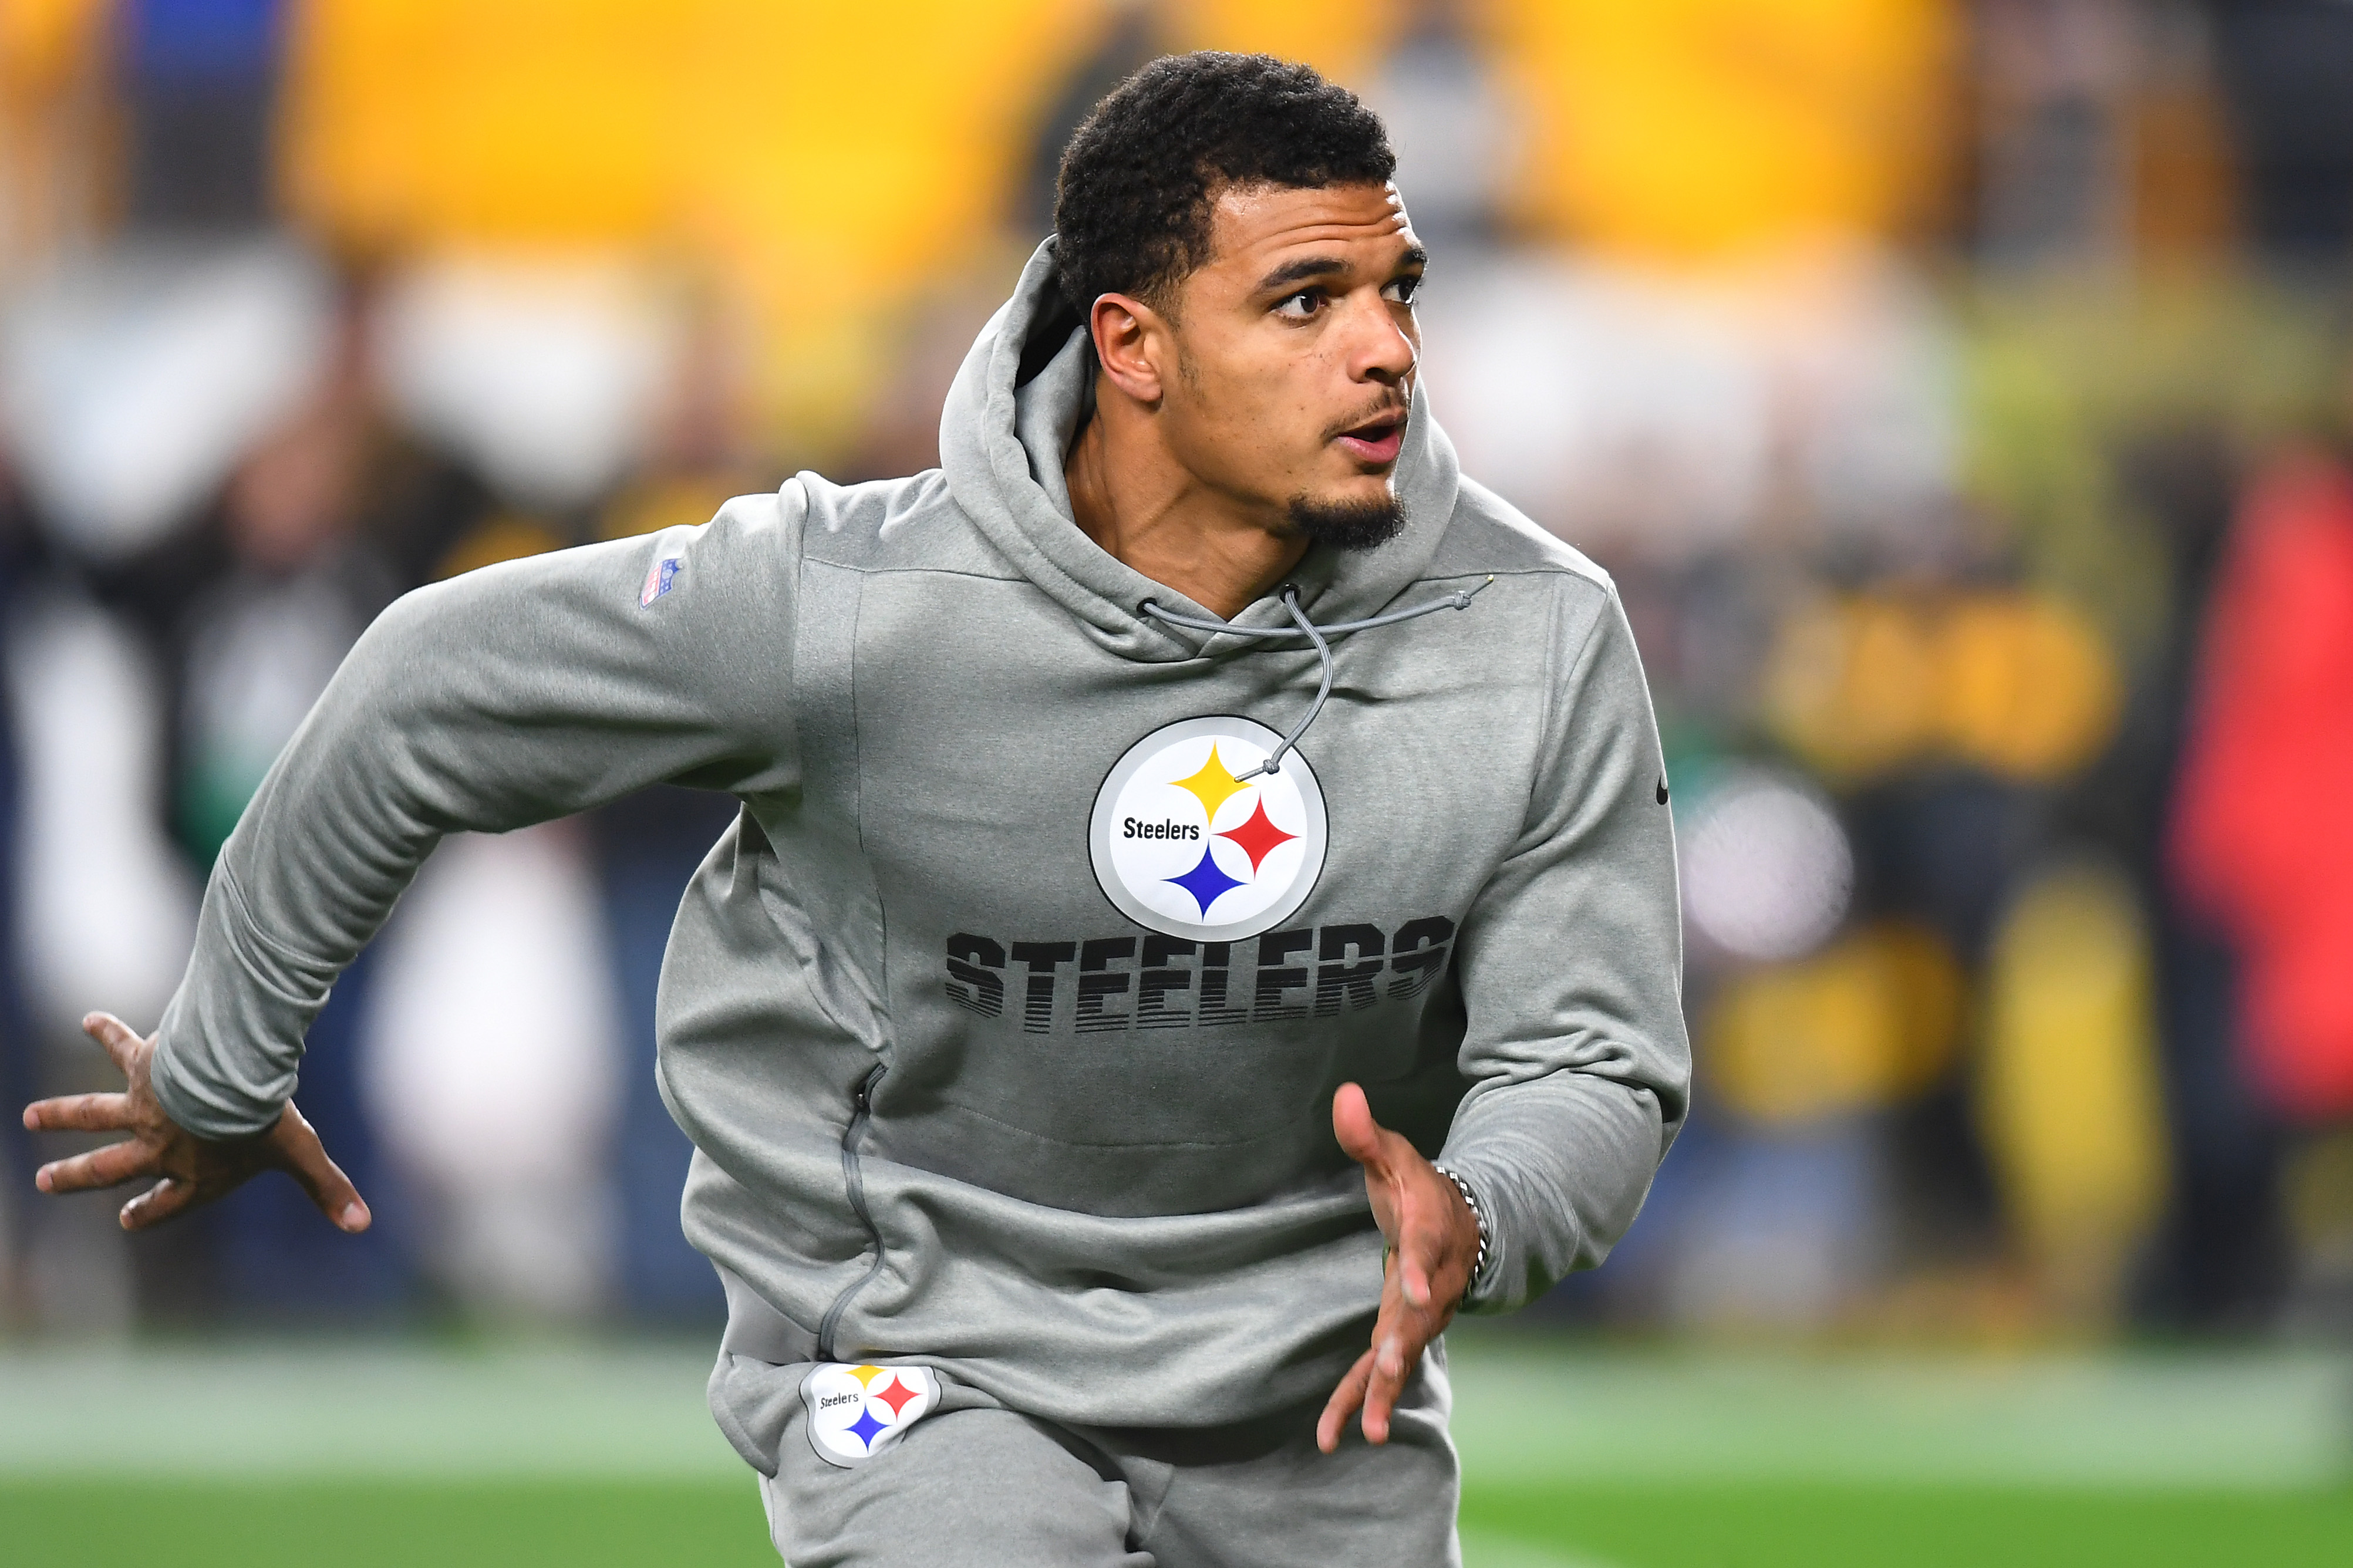 Minkah Fitzpatrick warming up before a Steelers game